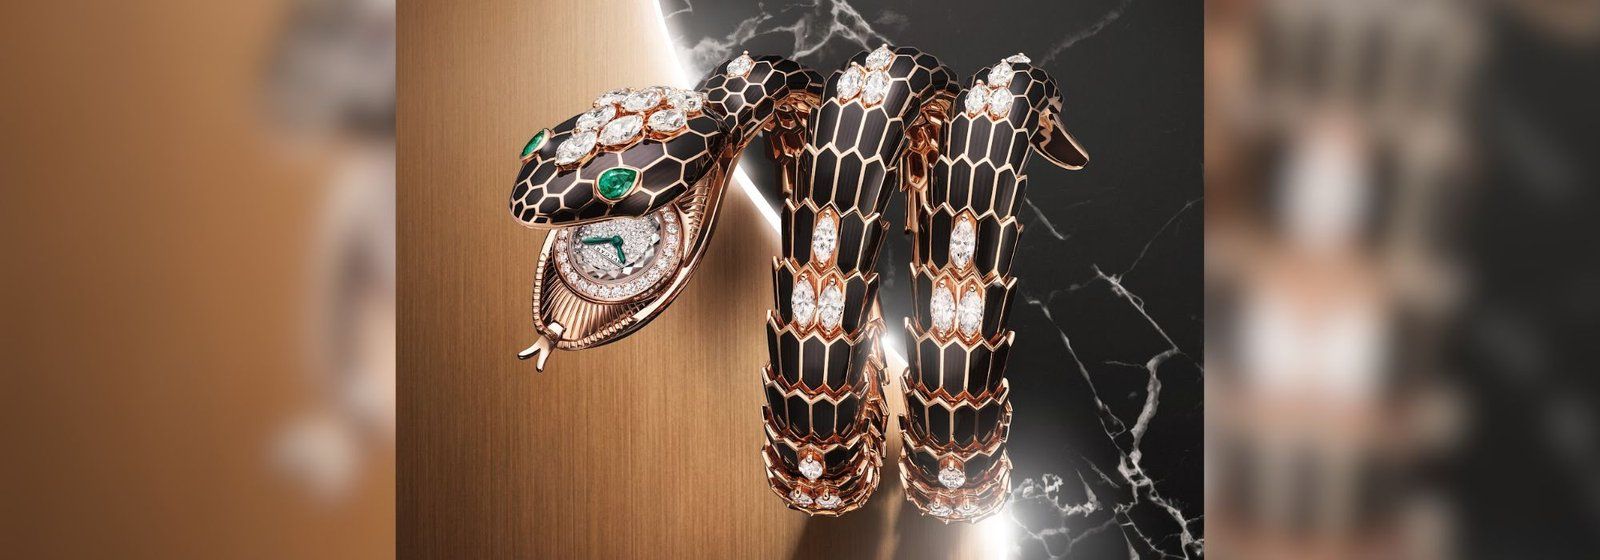 Are You Ready To Be Mesmerized By The New Bvlgari Serpenti Misteriosi?